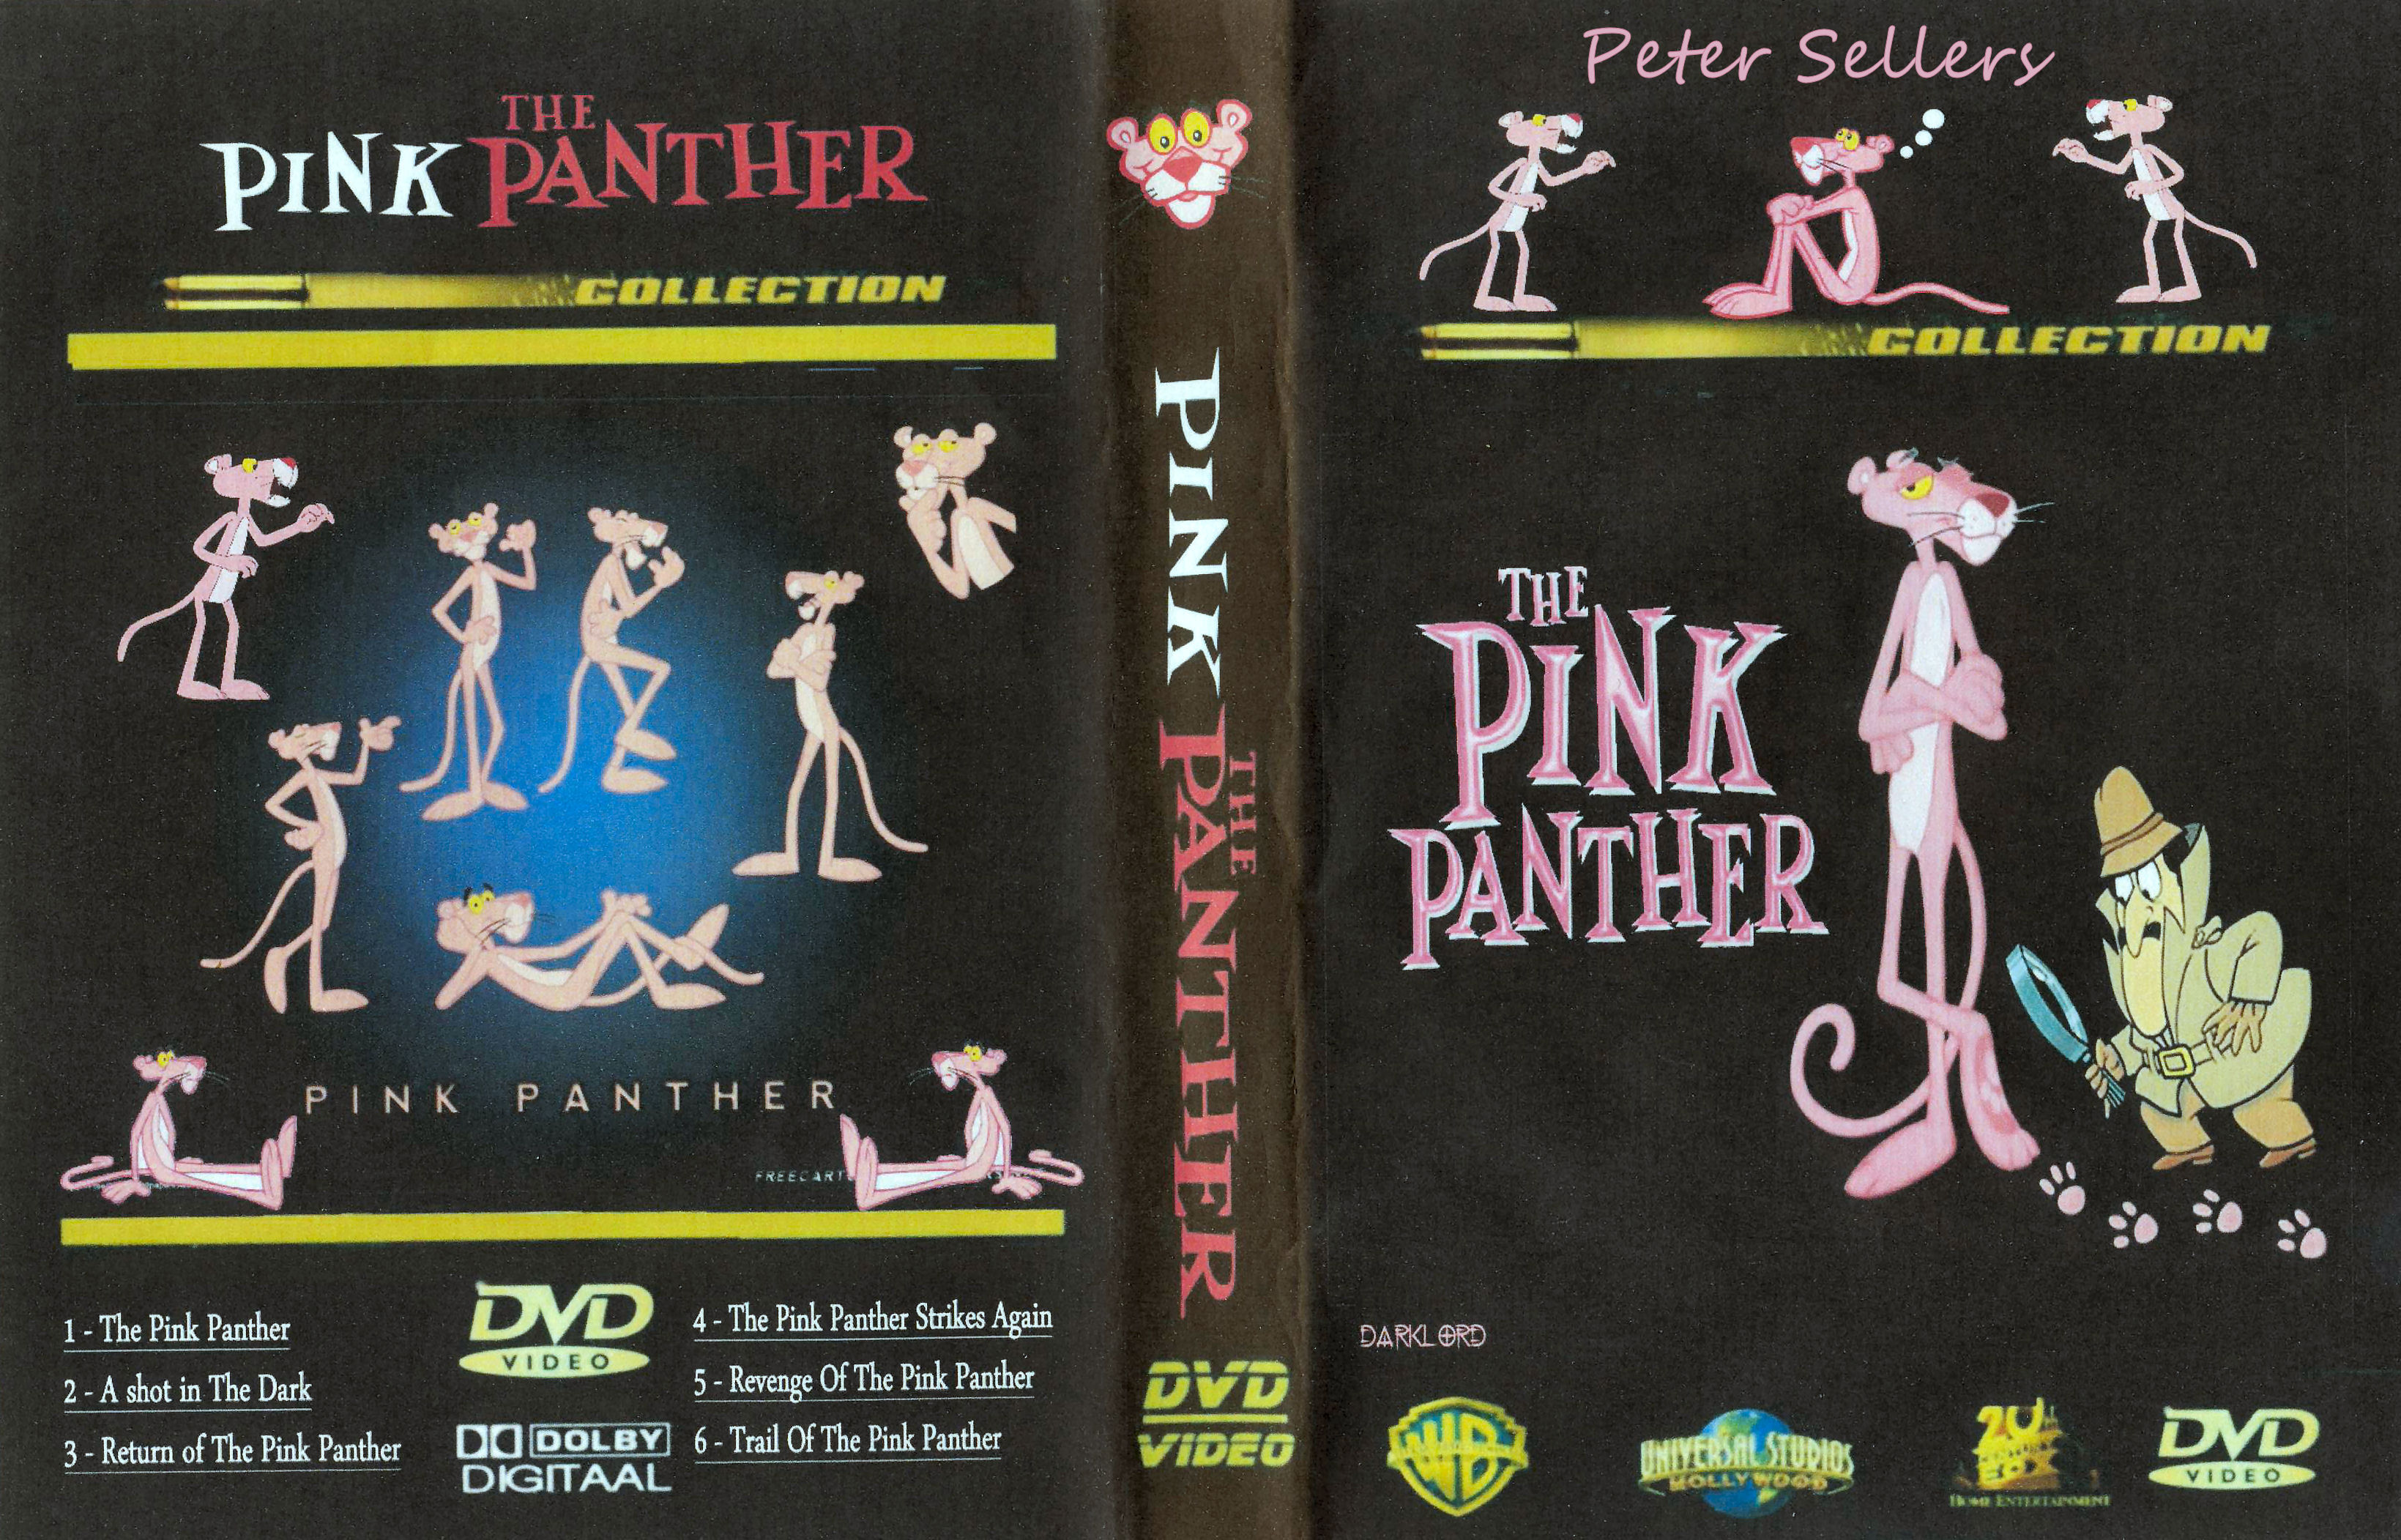 5. Revenge of the Pink Panther (1978)